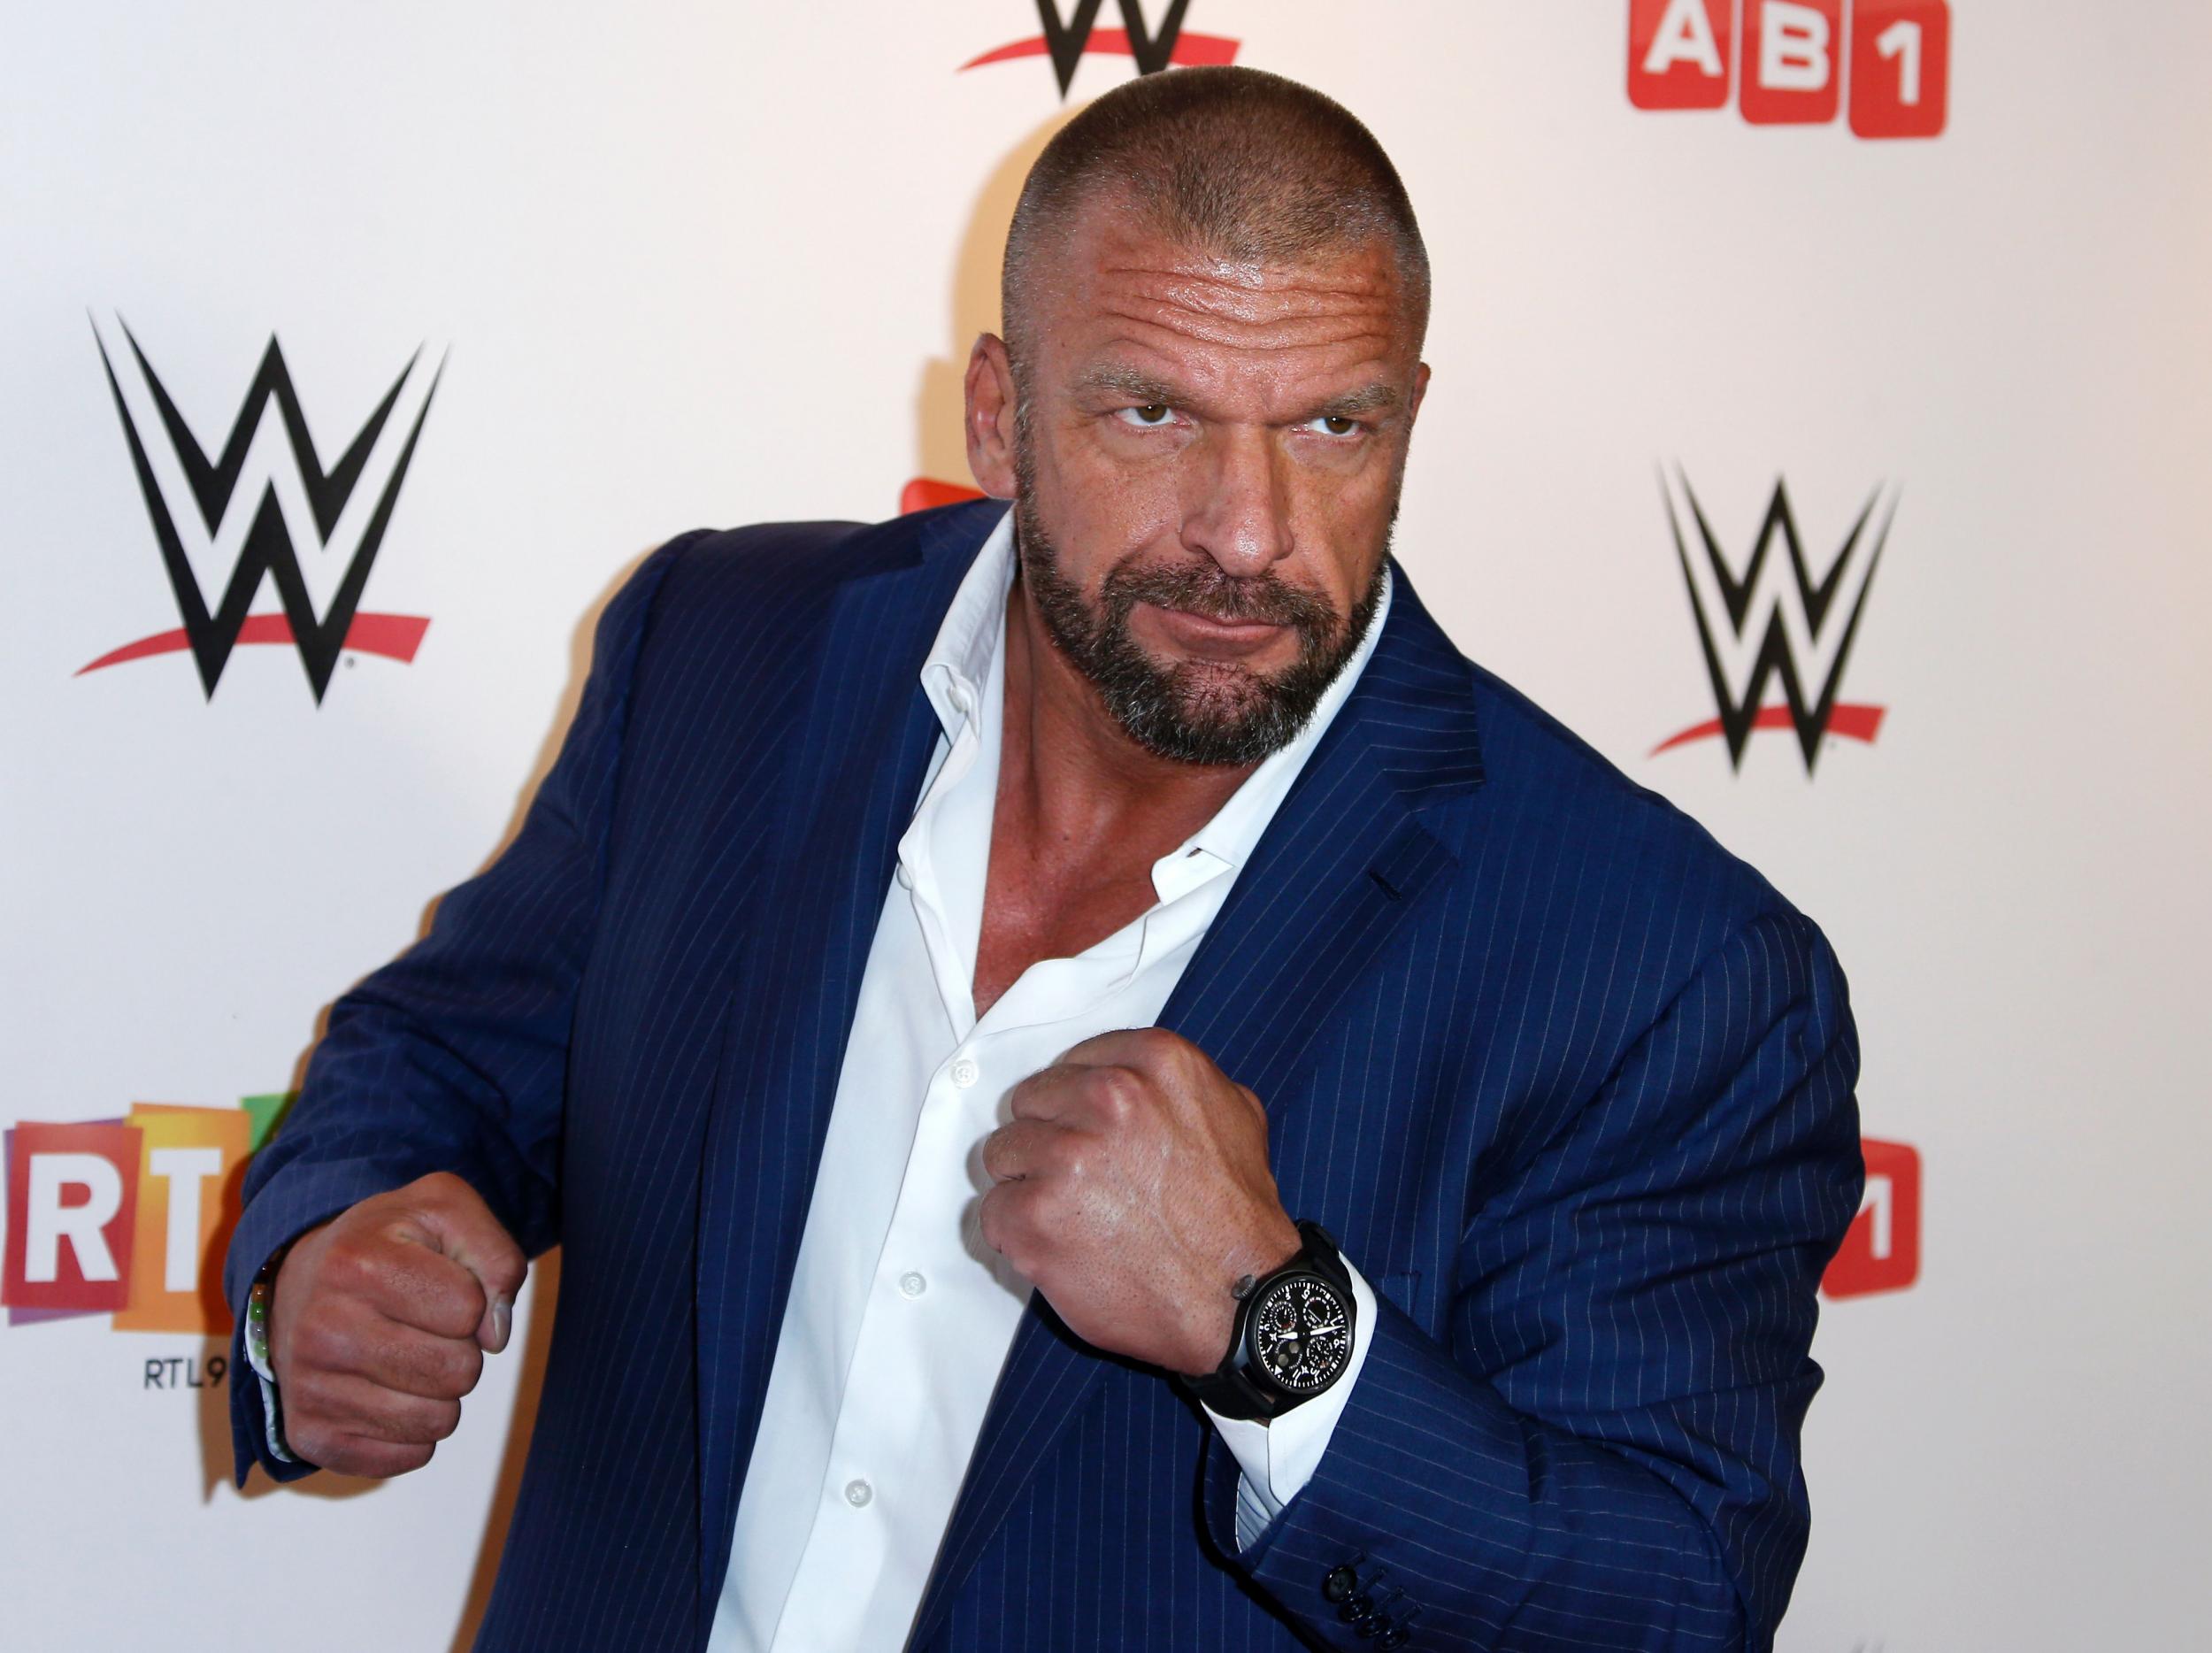 Triple H says he cannot wait to watch Mayweather vs McGregor